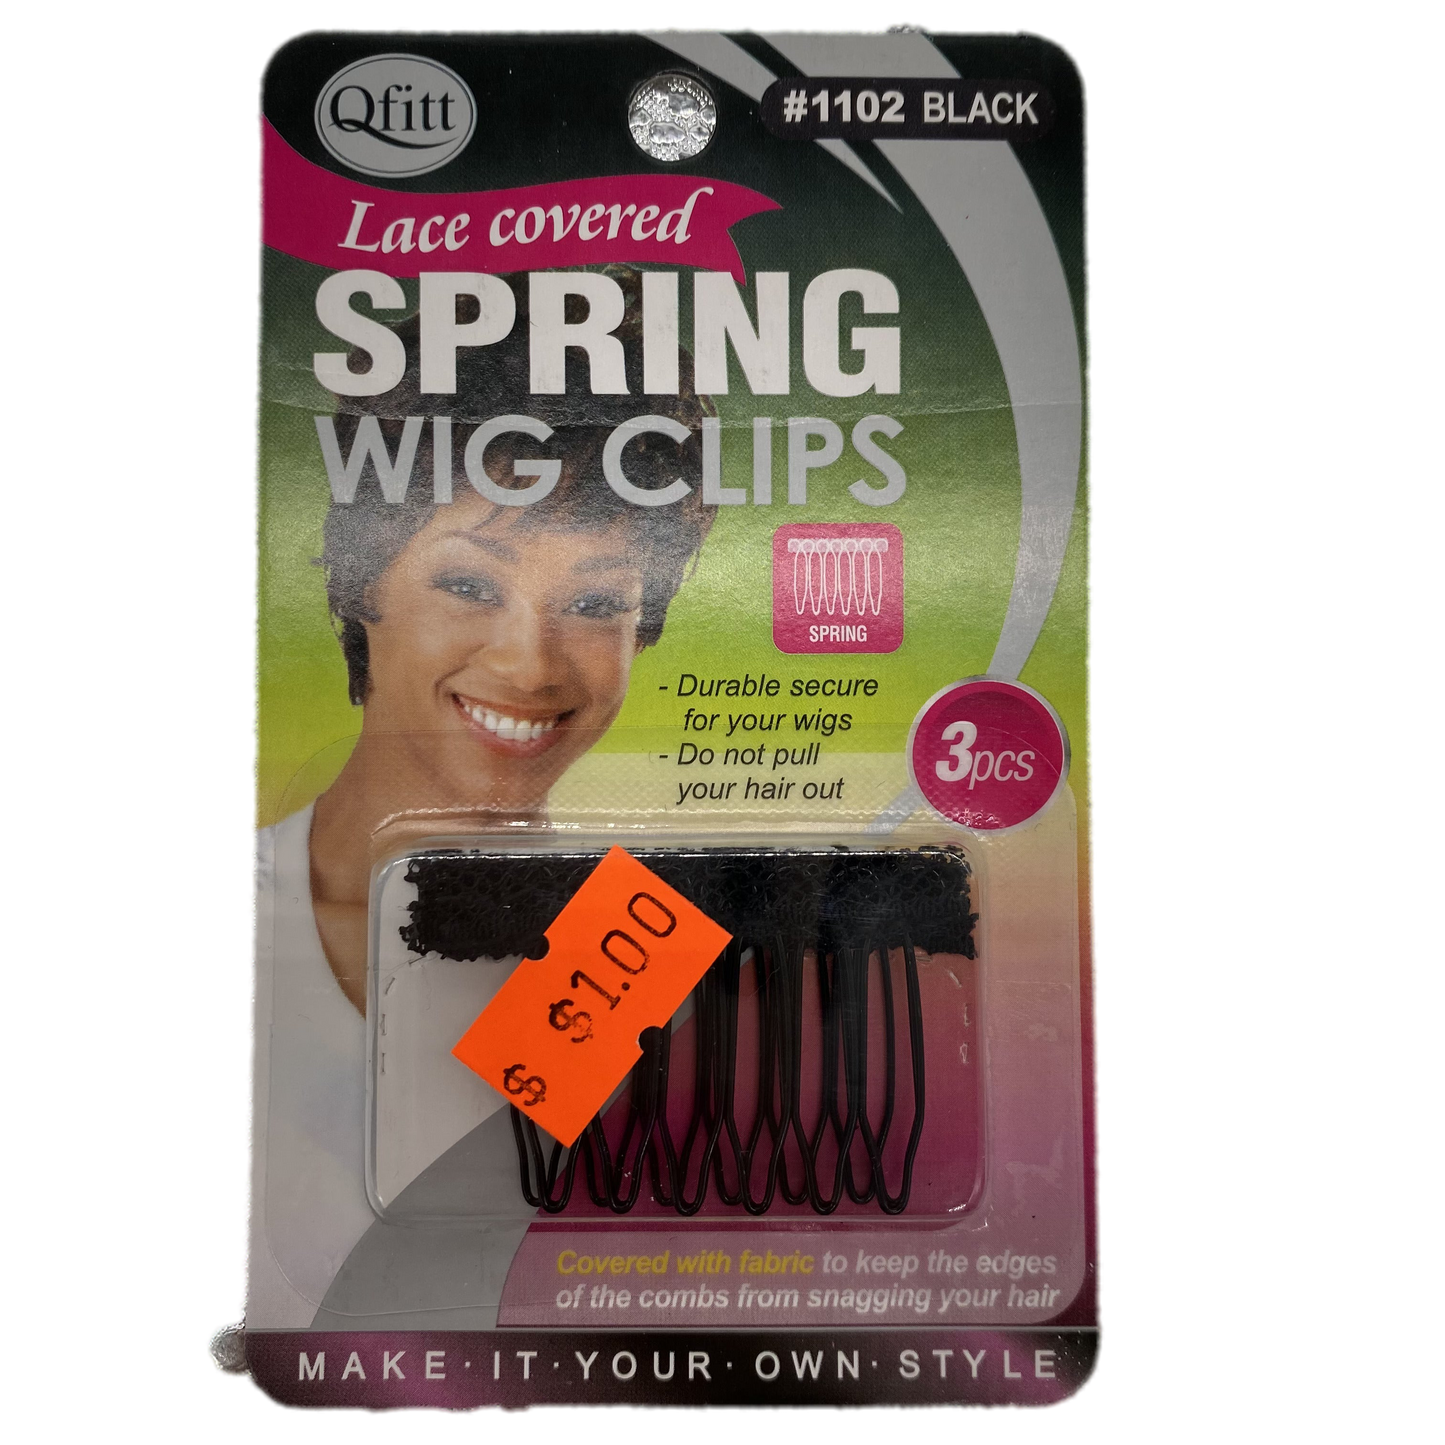 Qfitt Lace Covered Spring Wig Clips